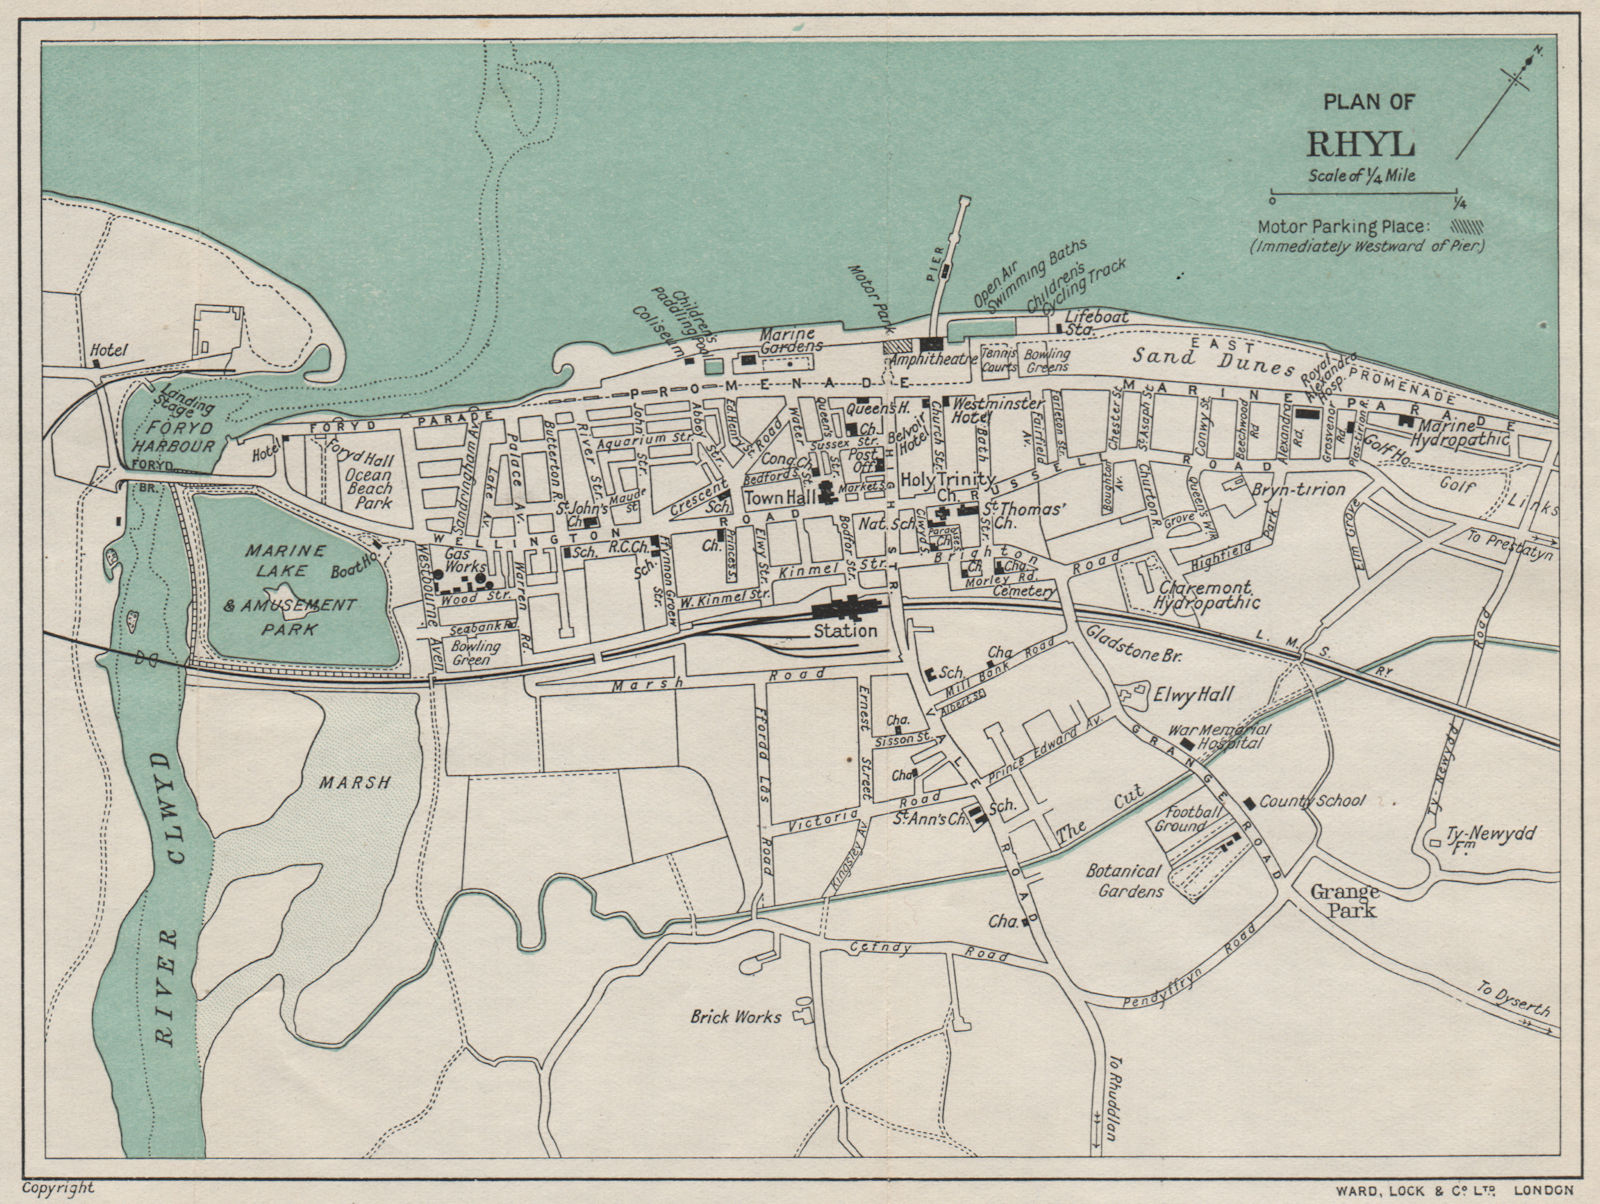 Associate Product RHYL vintage town/city plan. Wales. WARD LOCK 1930 old vintage map chart